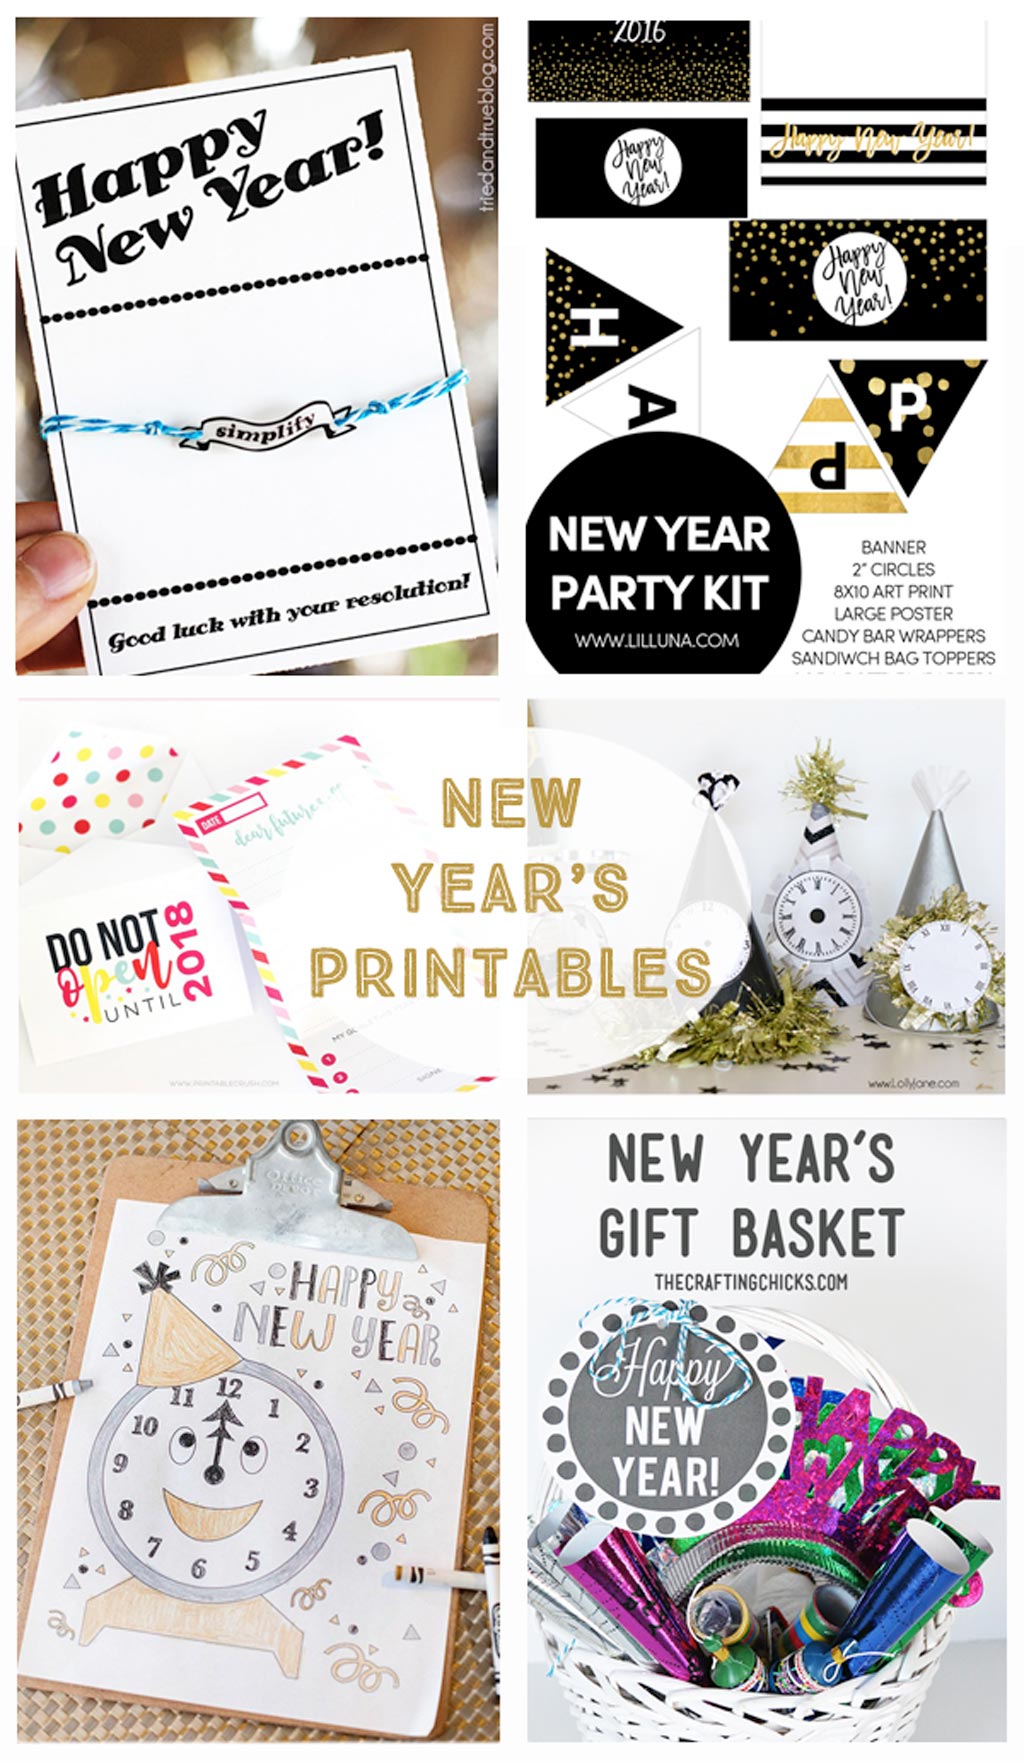 http://thecraftingchicks.com/wp-content/uploads/2016/12/New-Years-Printables.jpg